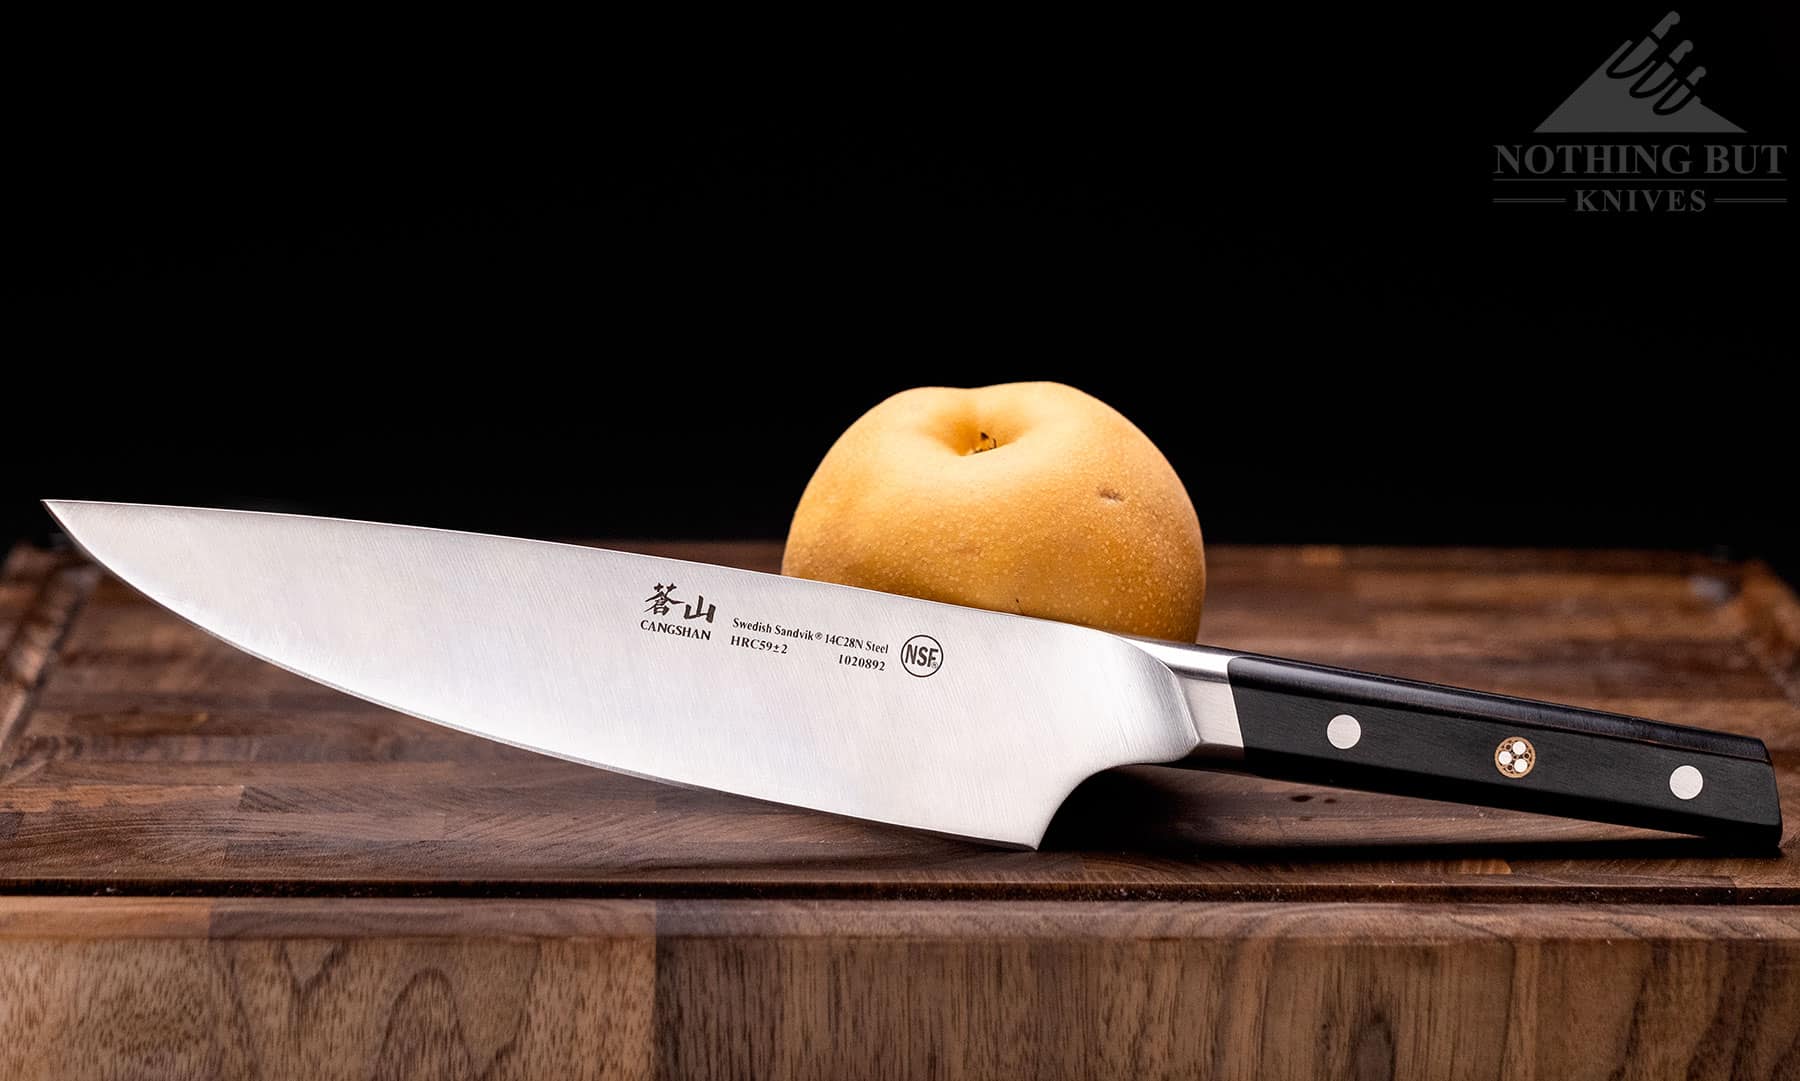 TC Chef's Knife Review | Nothing But Knives